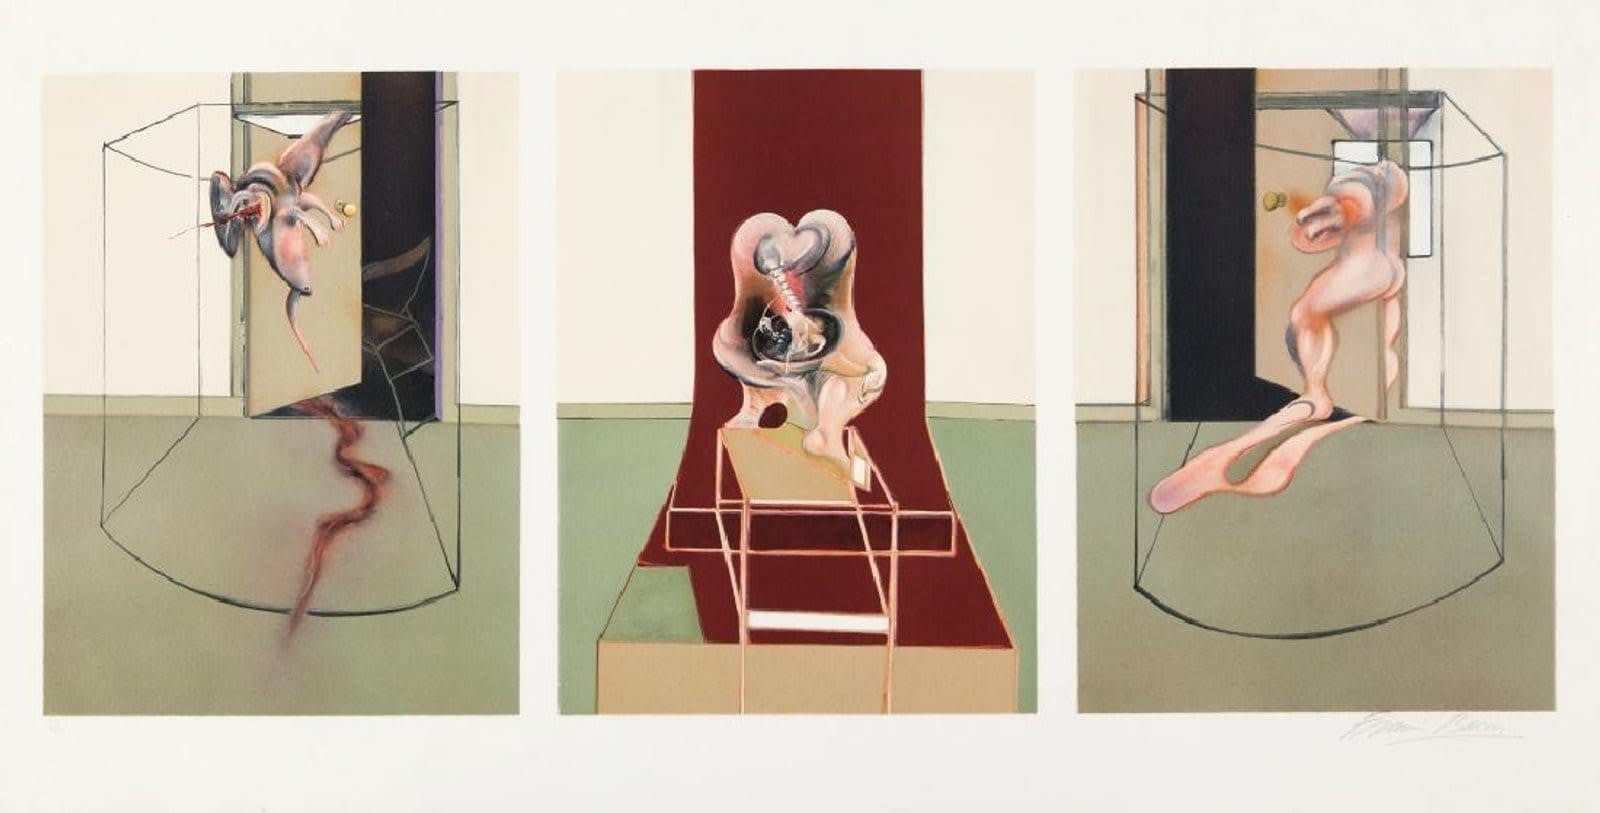 Francis Bacon, Triptych Inspired by Oresteia of Aeschylus, 1981